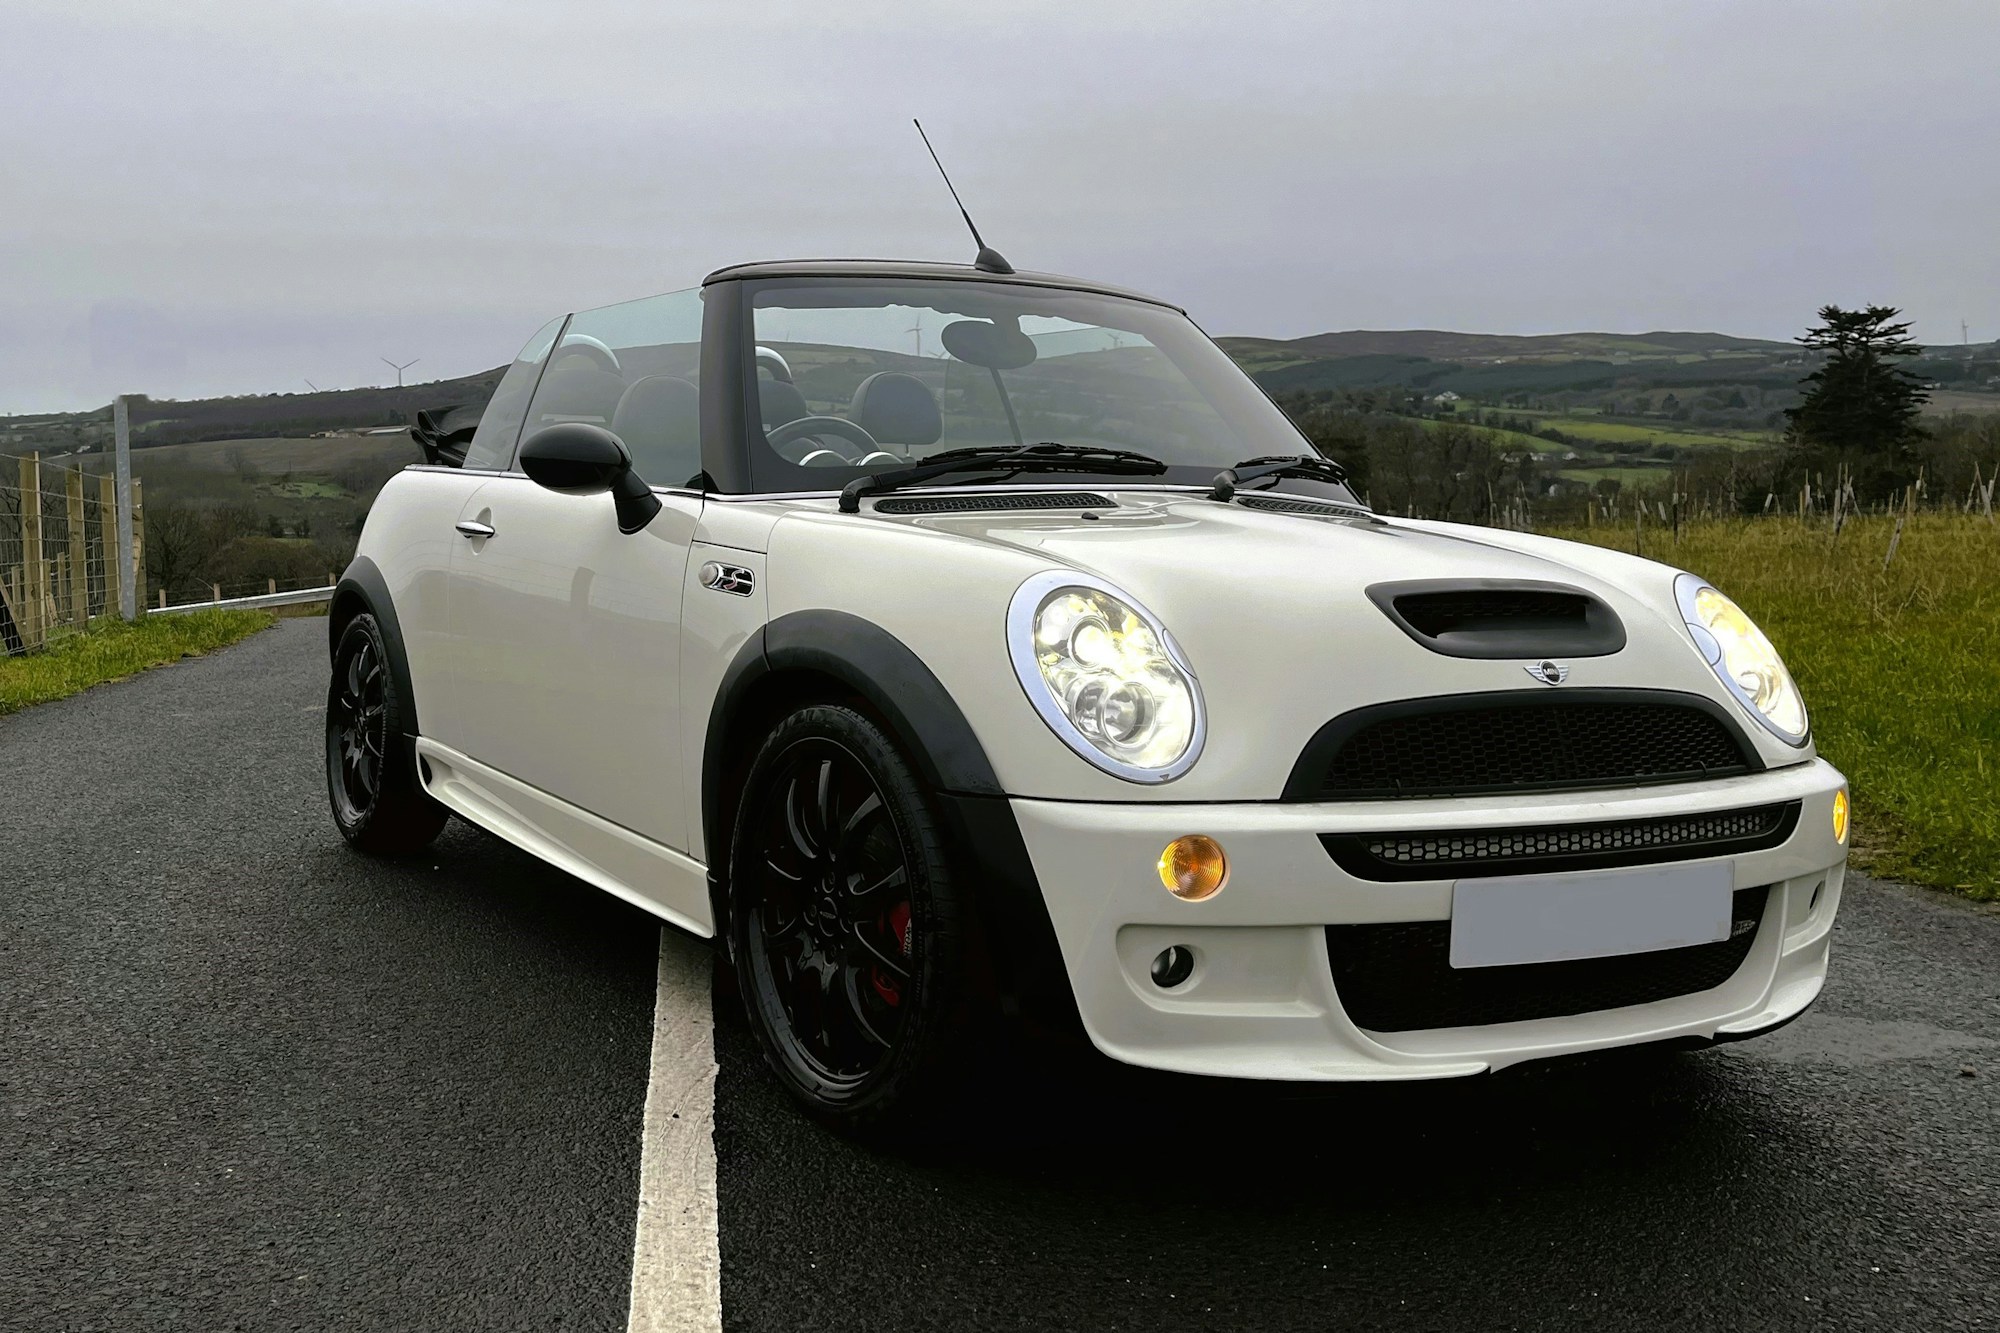 SOLD - 2007 R52 Mini Cooper Convertible for sale Review and